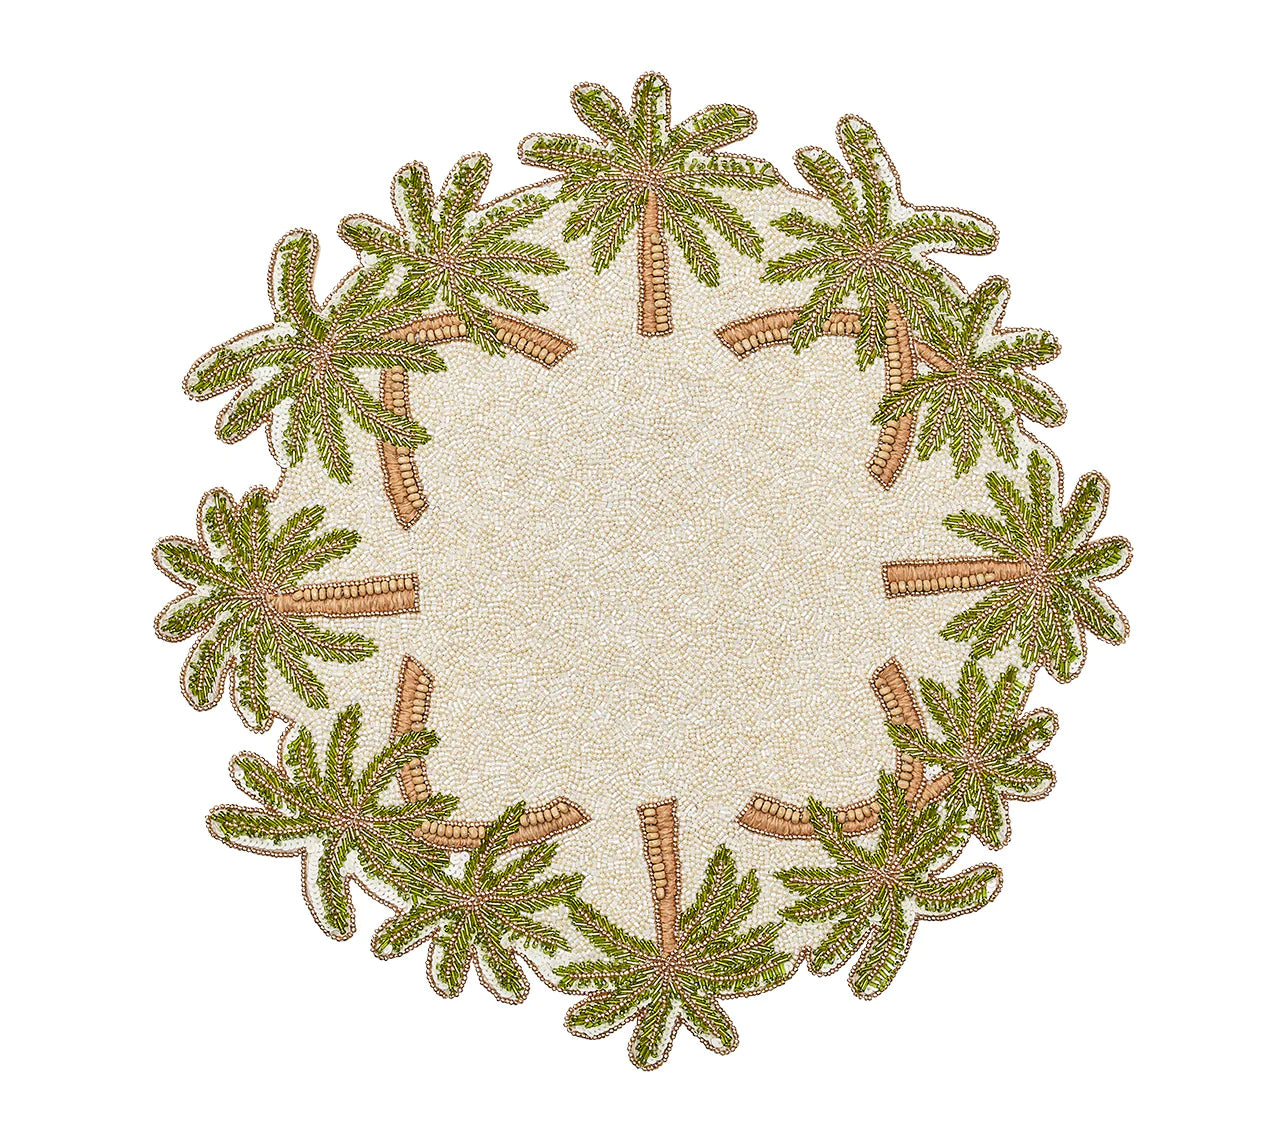 Oasis Placemat in Ivory, Green & Gold, Set of 2